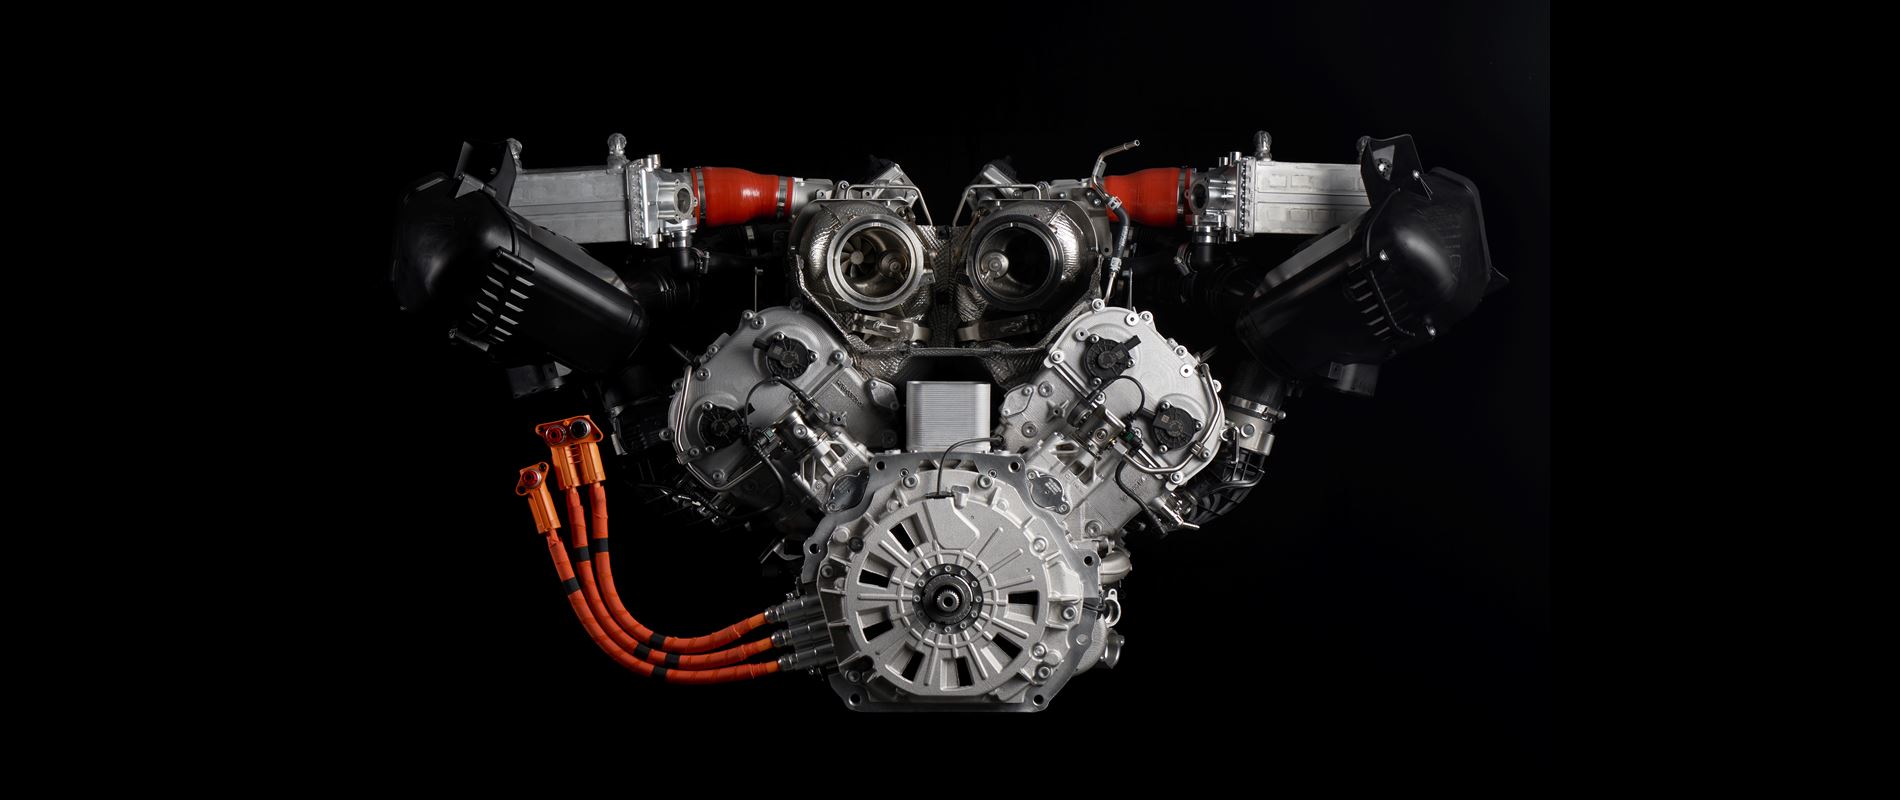 The next Lamborghini HPEV super sports car will be equipped with a hybrid twin turbo V8 engine